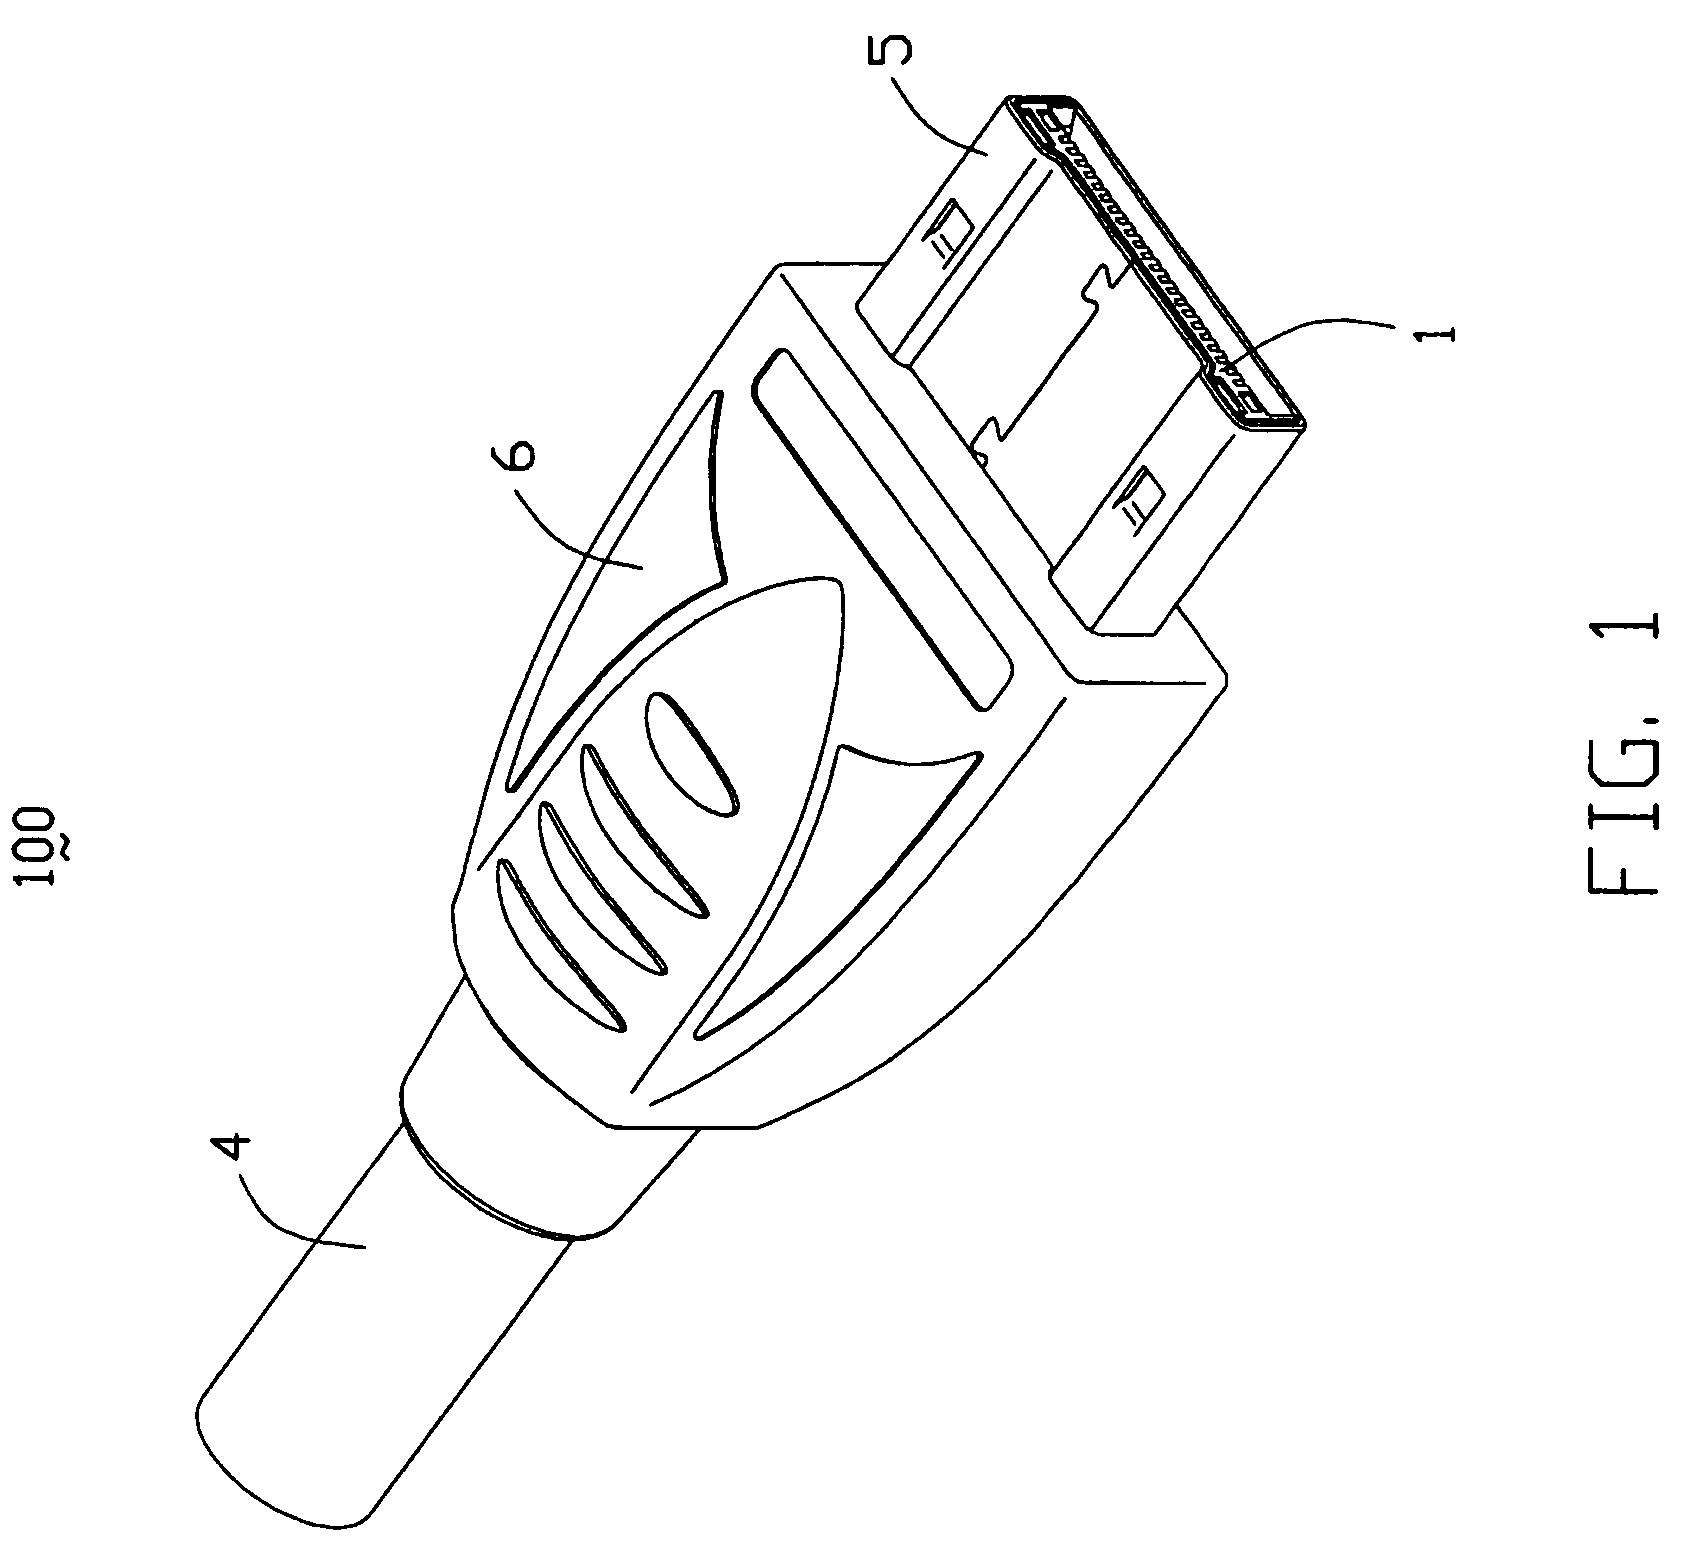 Electrical connector assembly with reduced crosstalk and electromaganectic interference